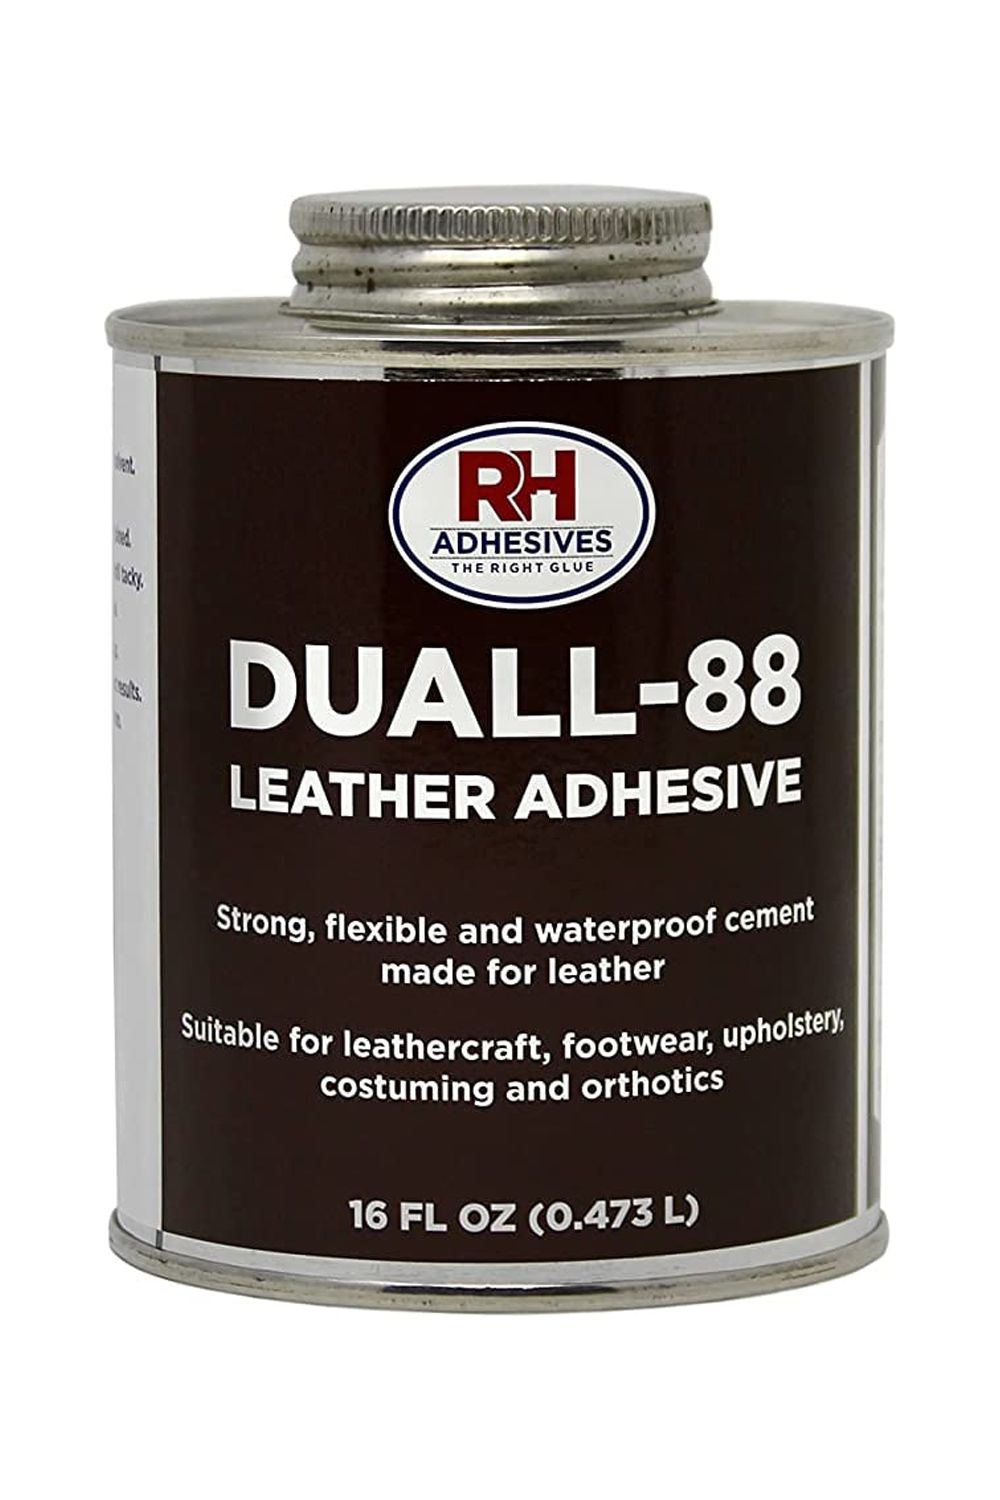 Duall-88 Leather Adhesive, 16 oz. can - RH Adhesives